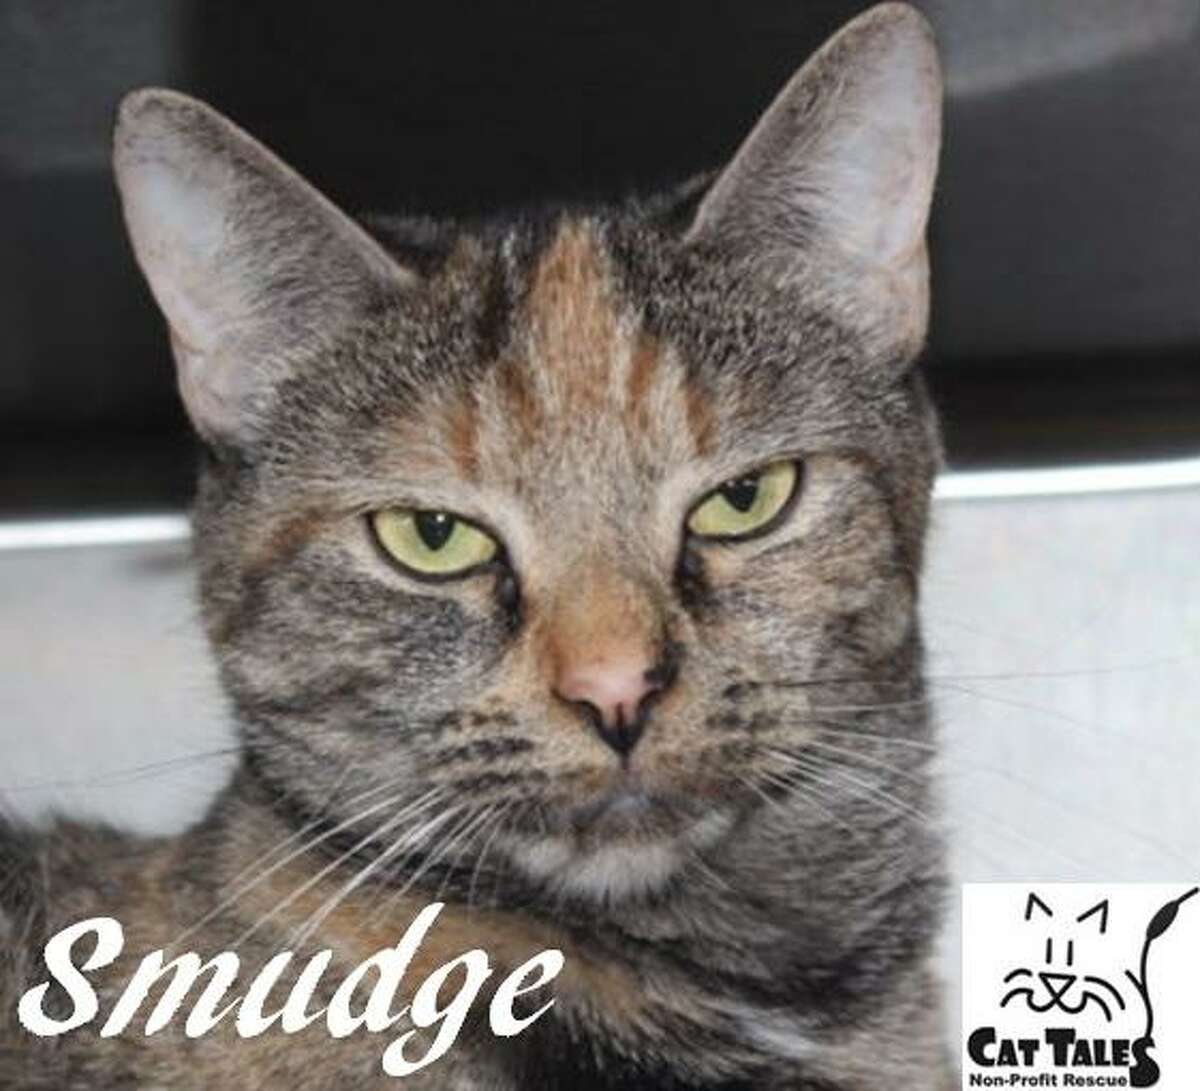 Smudge, a 2-year-old female torti, is ready to go to a new home. She says, “ I'm a very sweet kitty. My owner passed away and sadly, I was left without a home. I'd like a new home with a person or family who will pet and play with me and give me time to adjust to my surroundings. I'd prefer to be your only kitty. Please adopt me as I have so much love to give.”  Visit http://www.CatTalesCT.org/cats/Smudge-2, call 860-344-9043 or email info@CatTalesCT.org. Watch our TV commercial: https://youtu.be/Y1MECIS4mIc